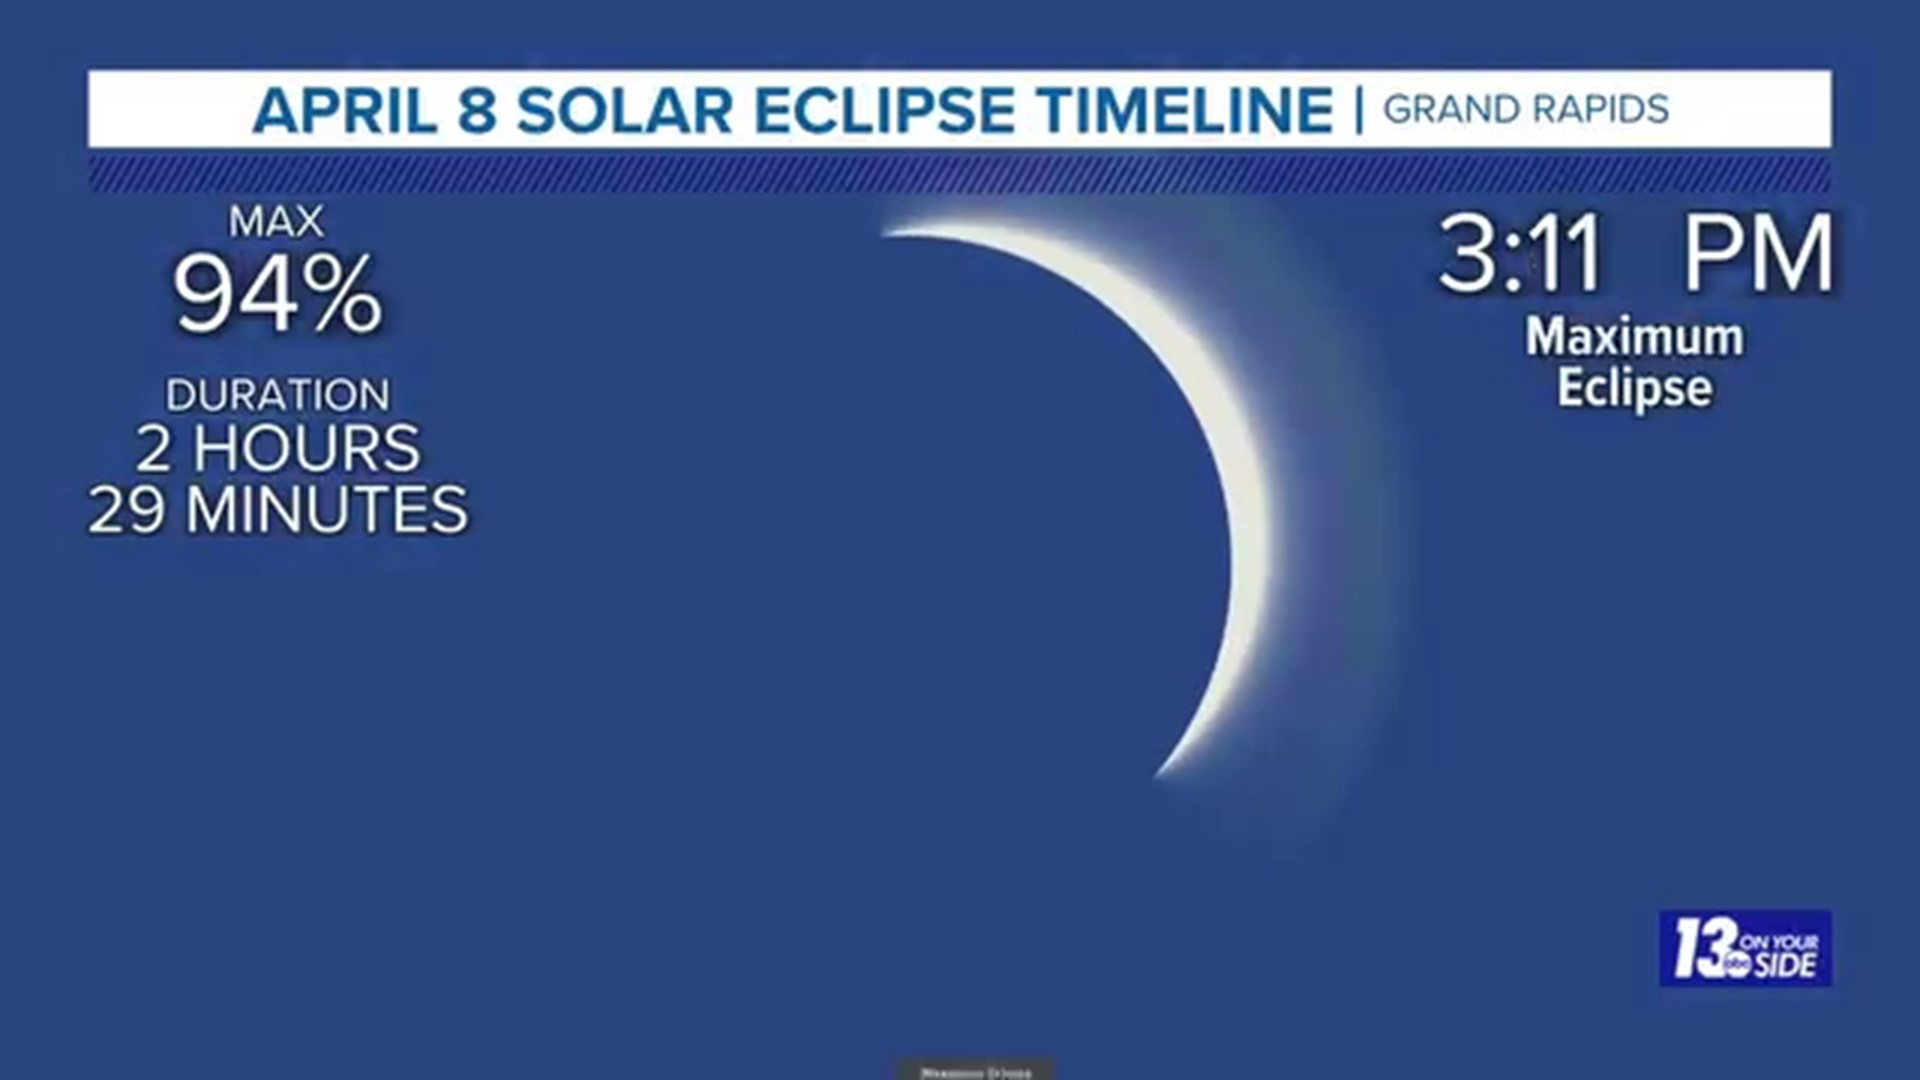 Here's what the solar eclipse will look like in Grand Rapids, Michigan on April 8, 2024.